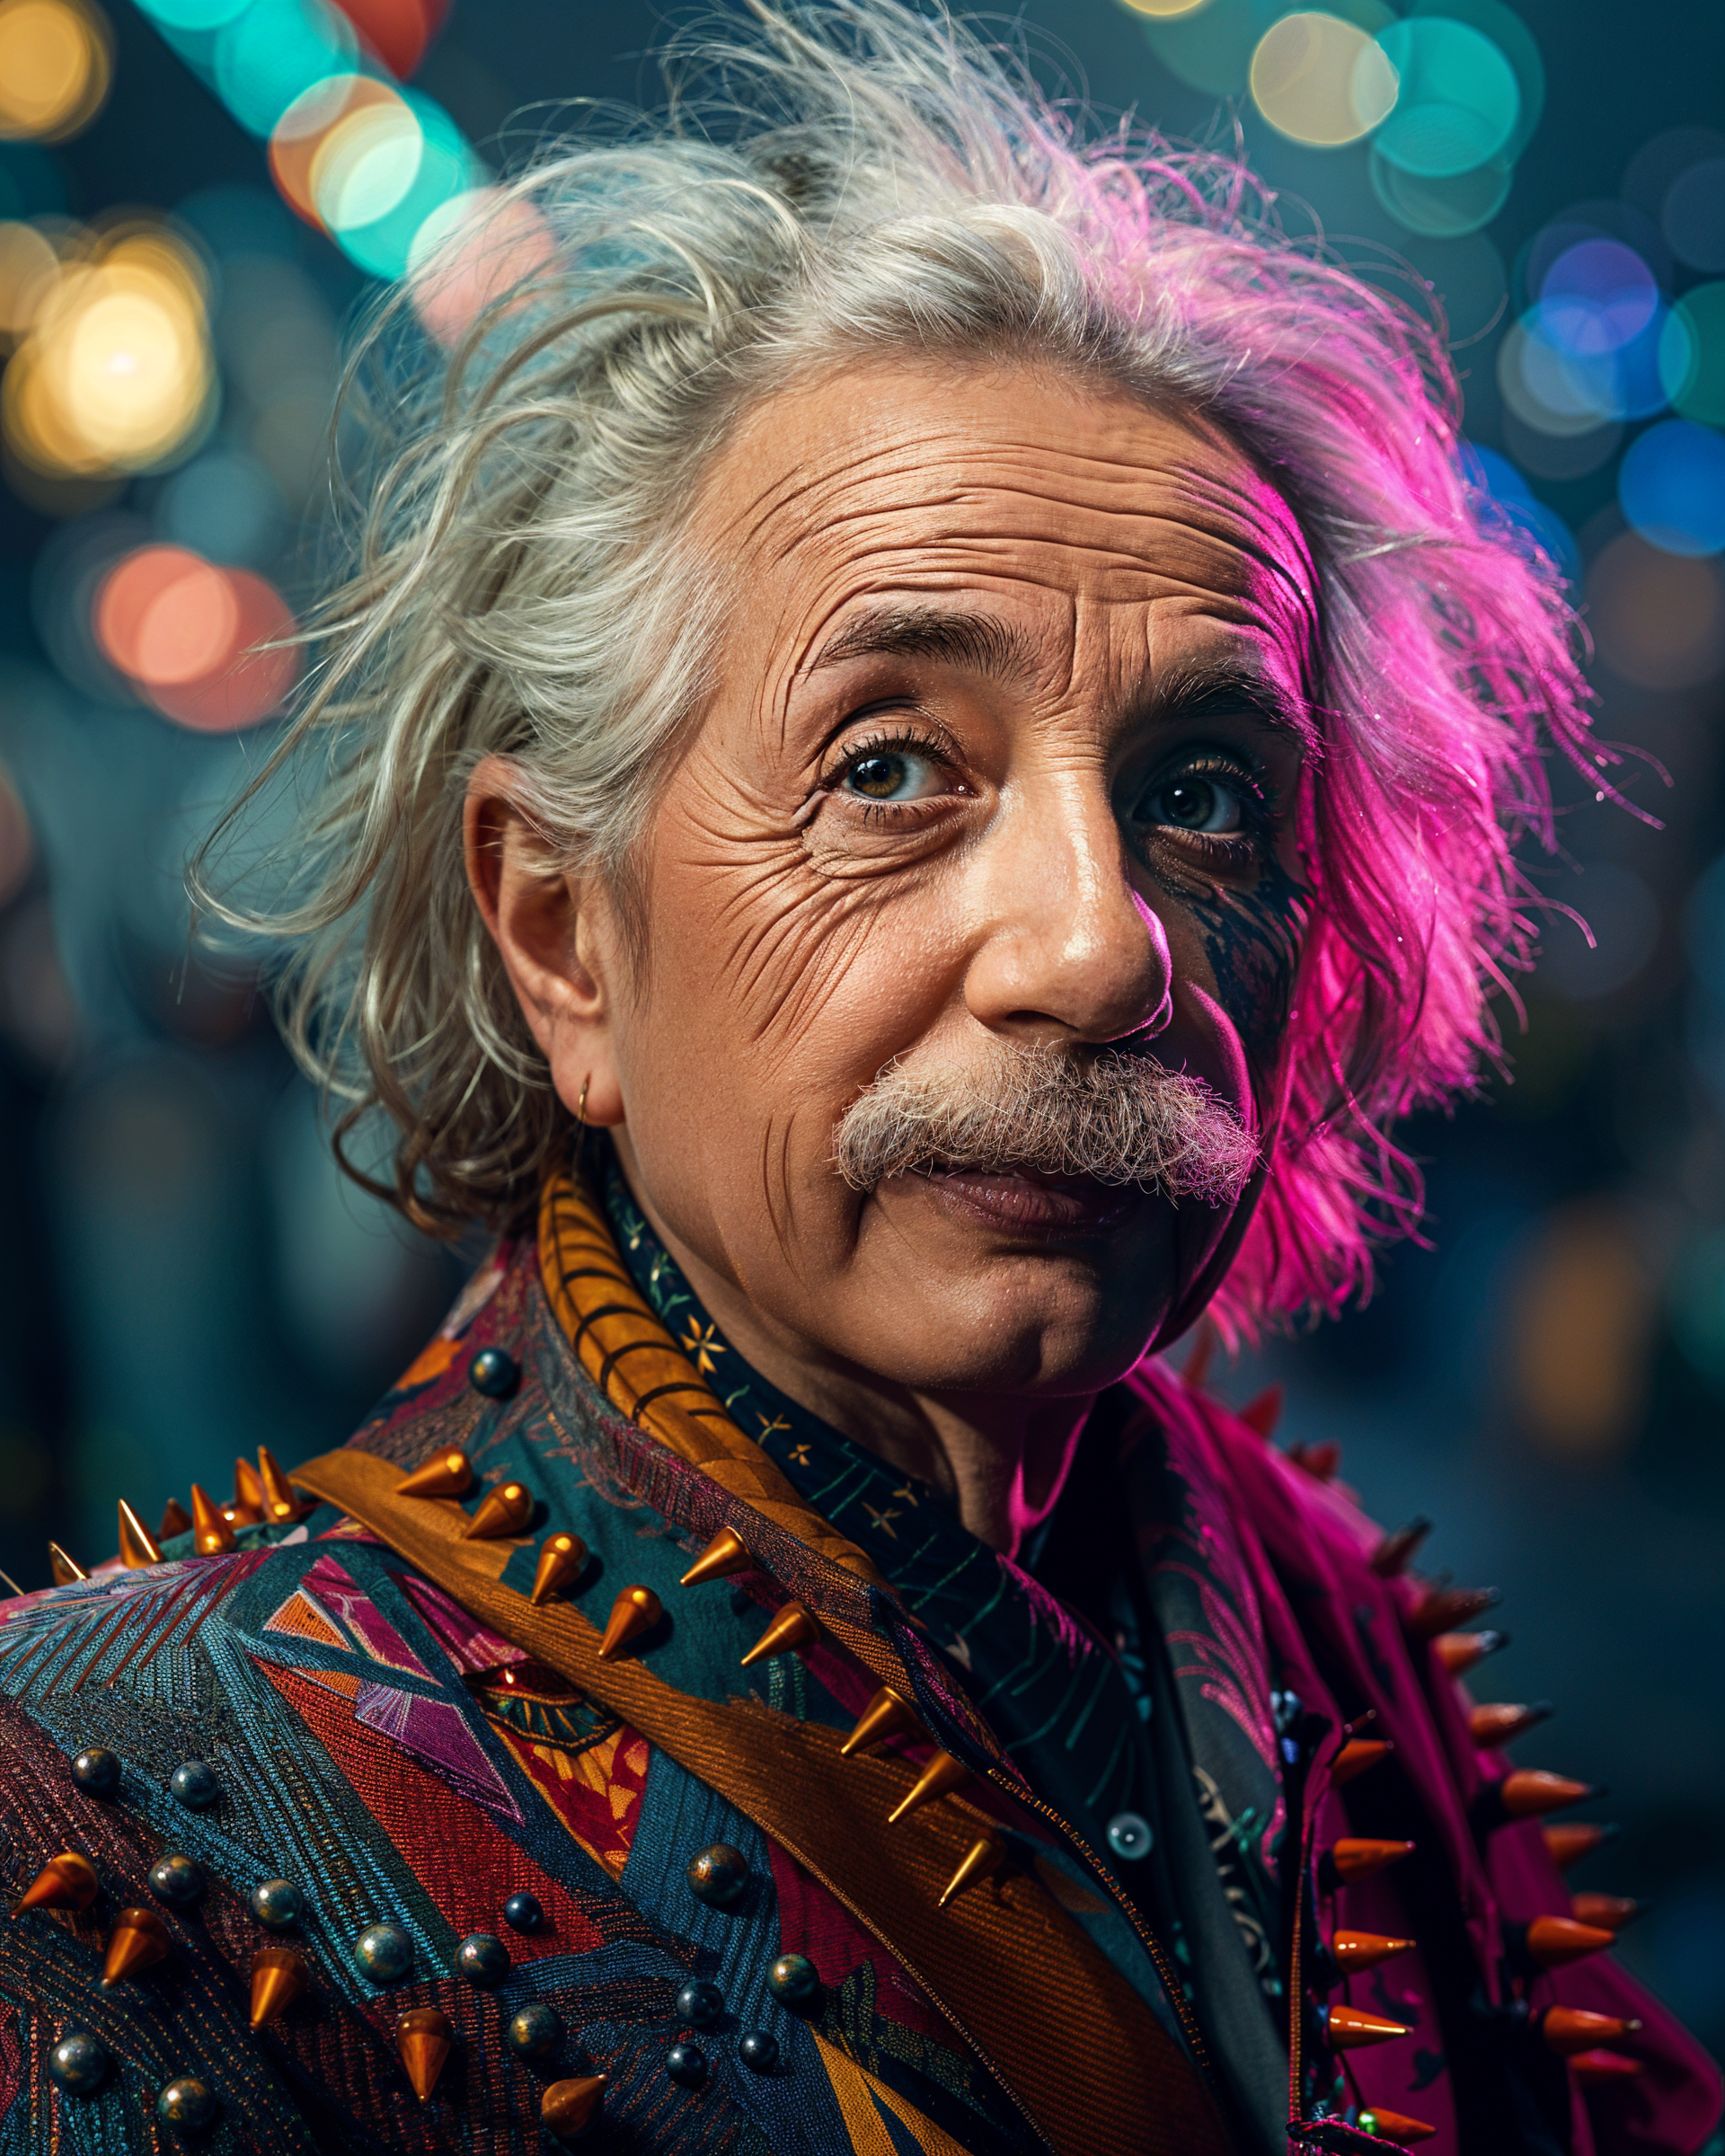 Colorful portrait of Albert Einstein with graying hair, a mustache, pierced nose, and a spiky jacket against a vivid bokeh ba